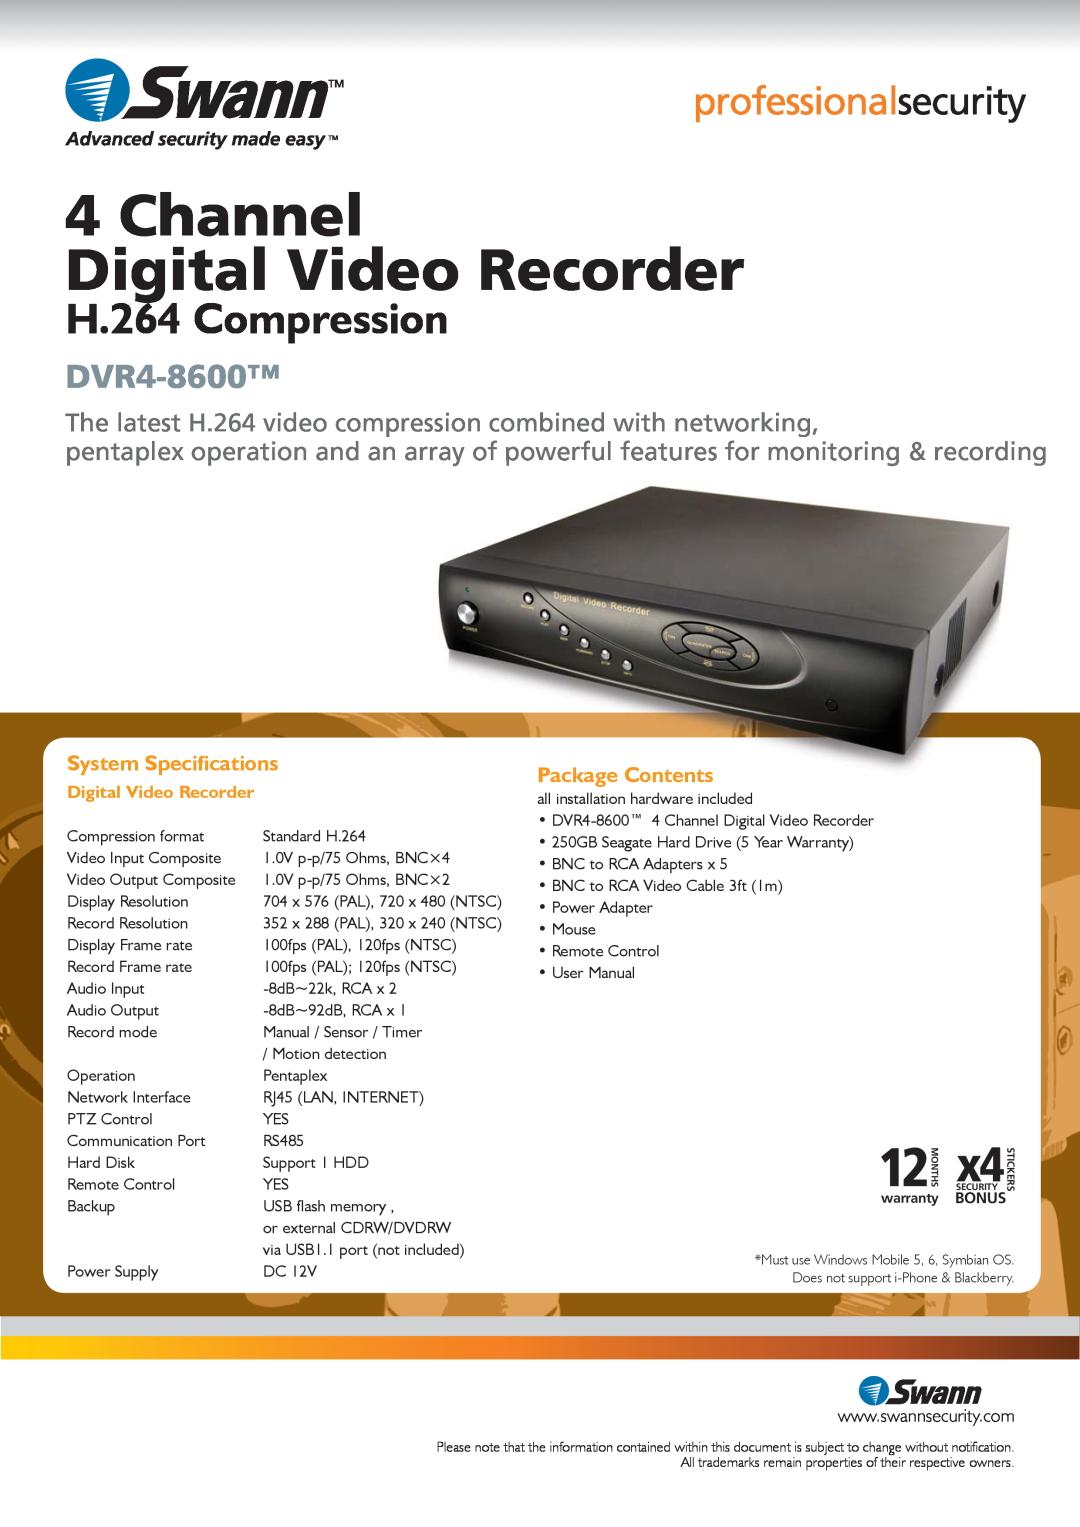 Swann SW224-6T4 The latest H.264 video compression combined with networking, Channel Digital Video Recorder, DVR4-8600 